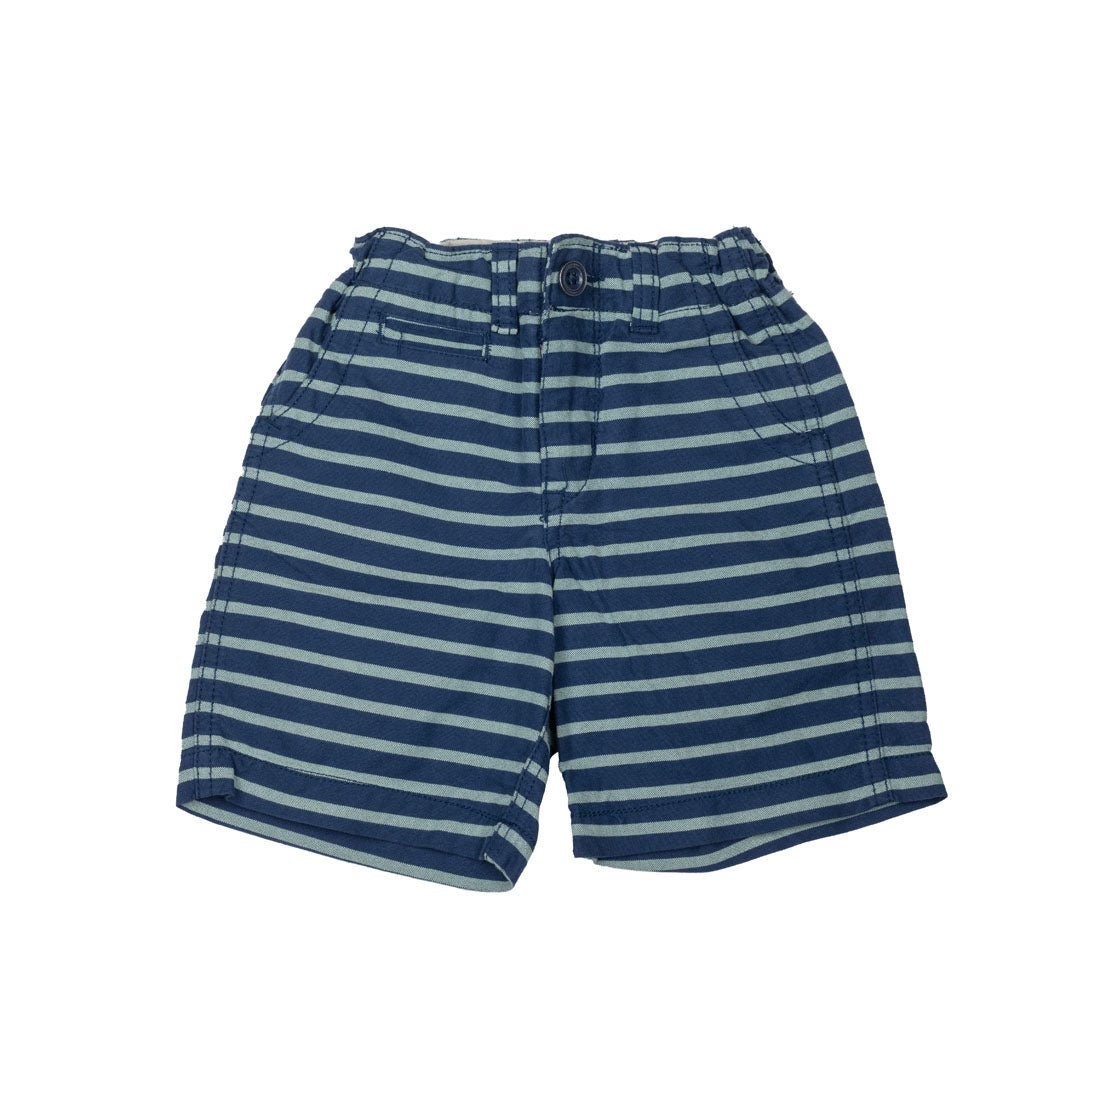 Gap Shorts For Boys. - mymadstore.com